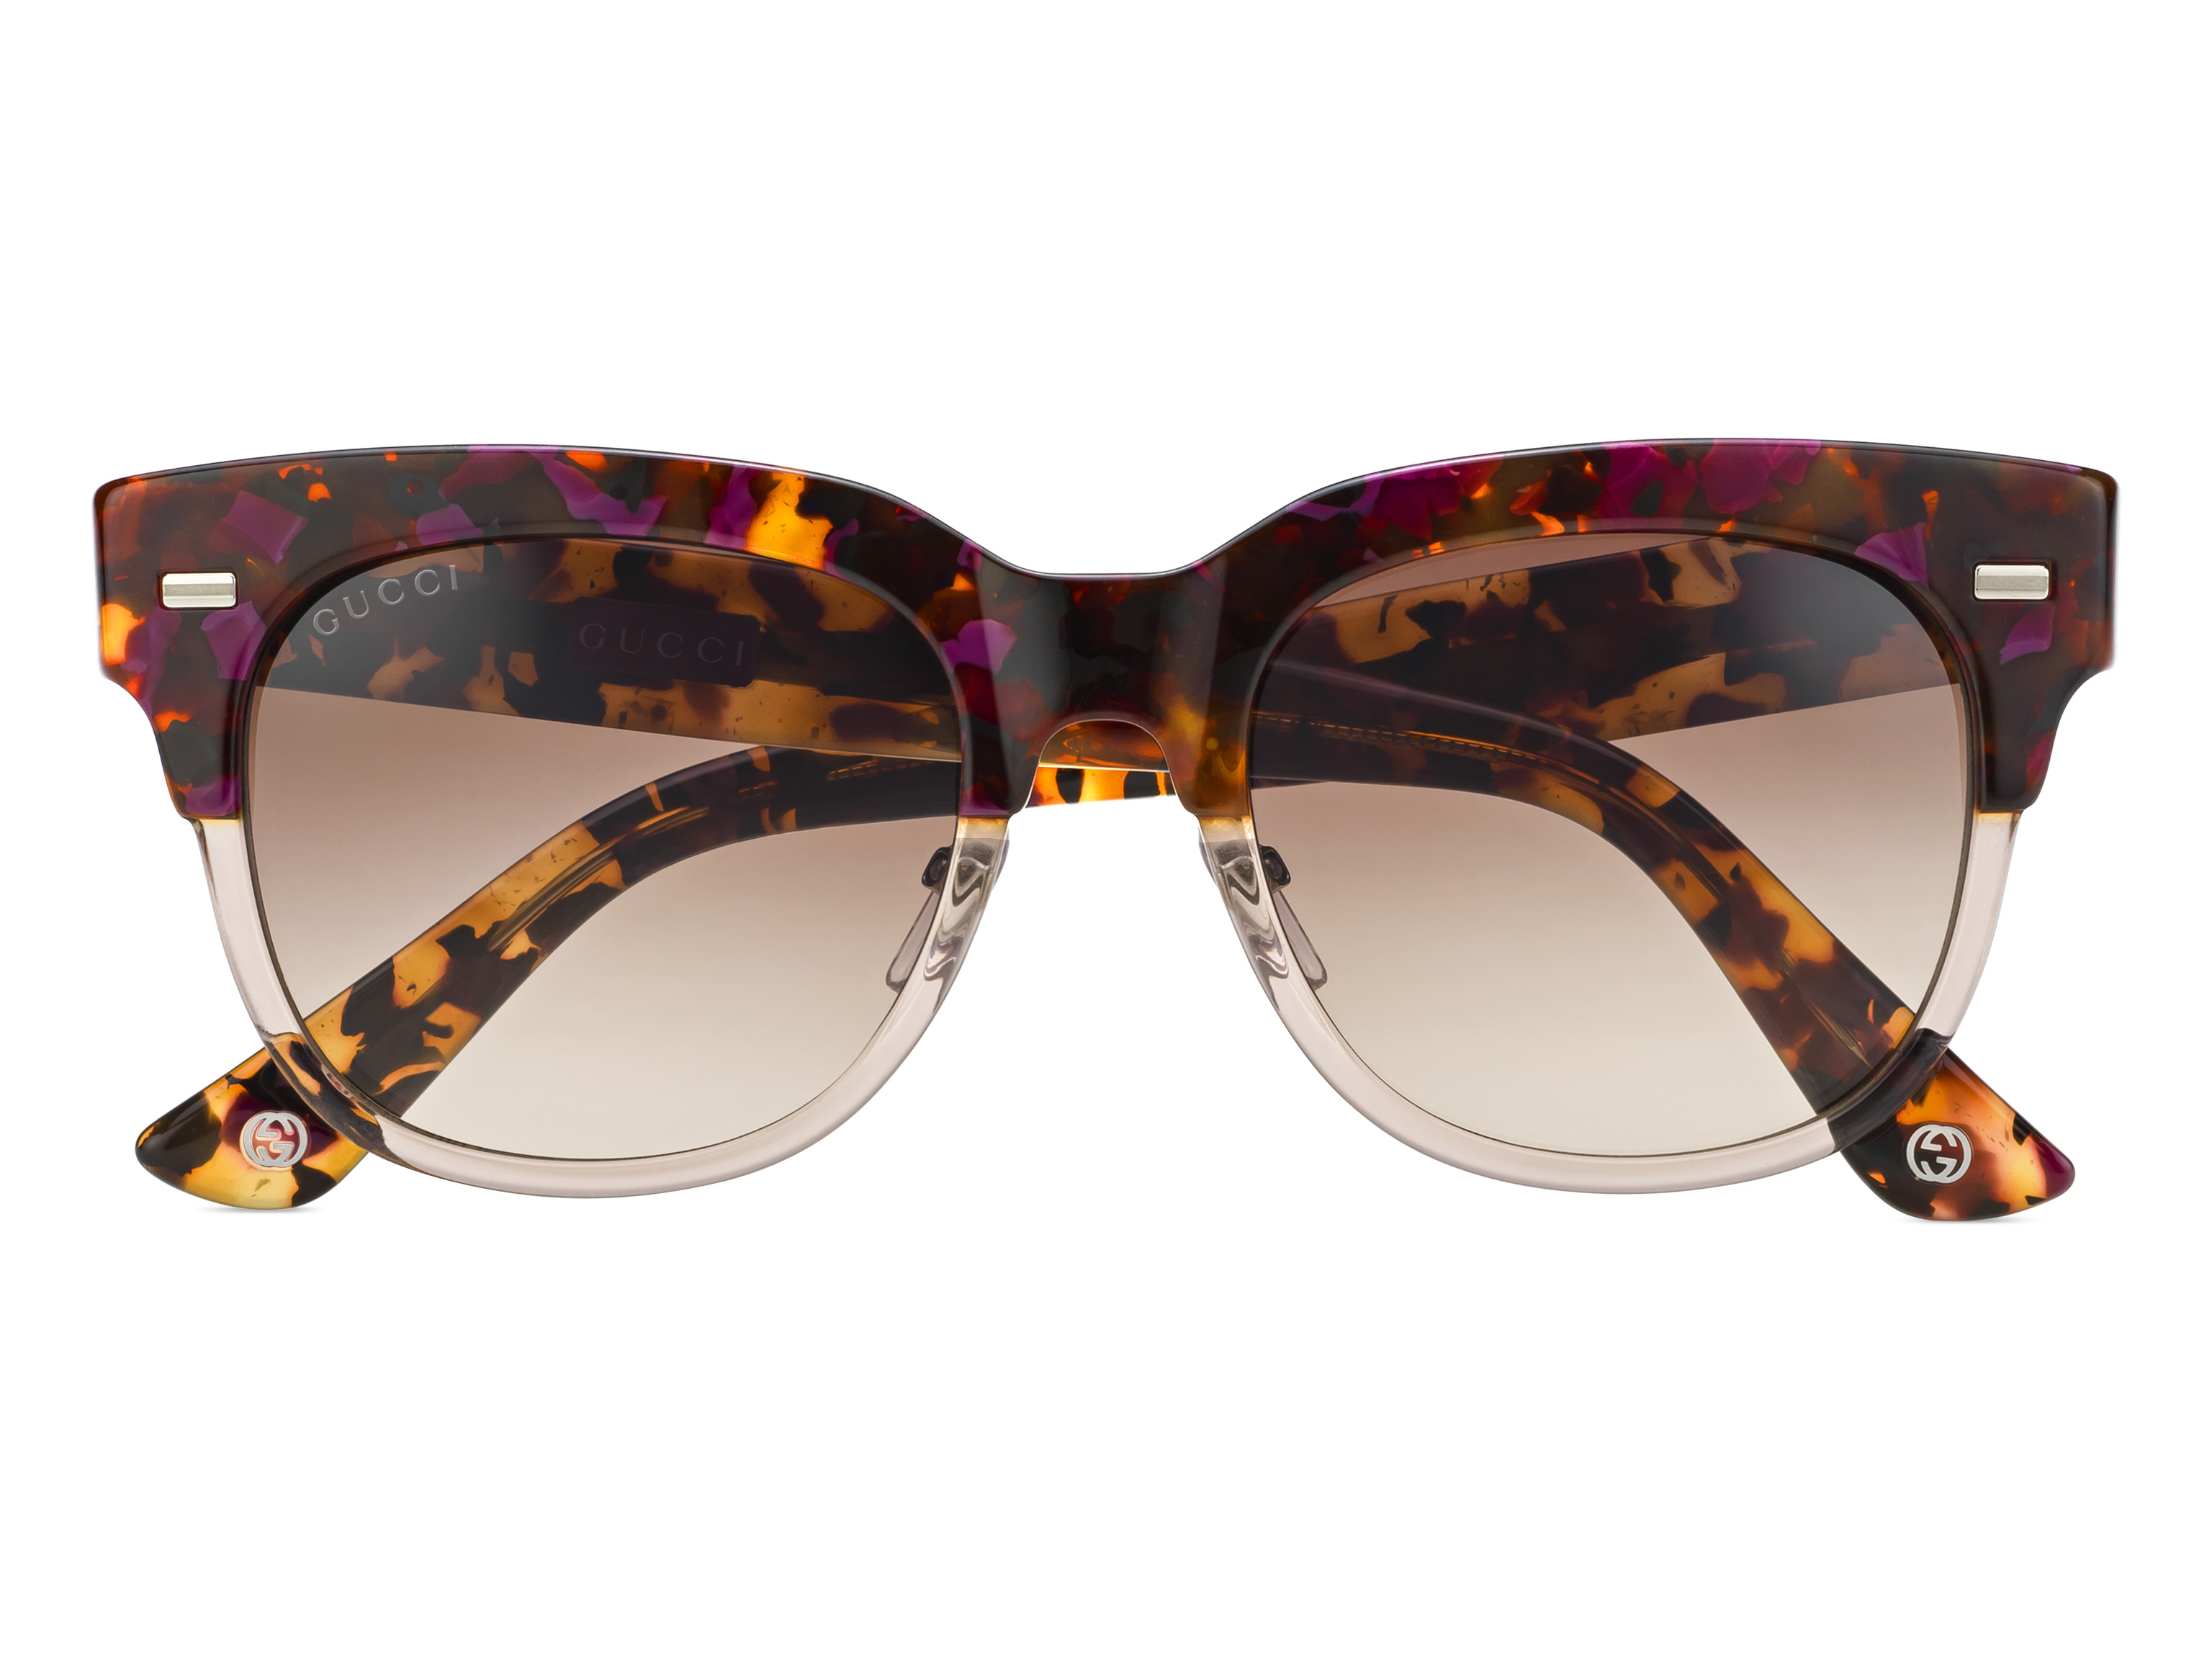 New Sunglasses from GUCCI | Pamper.My